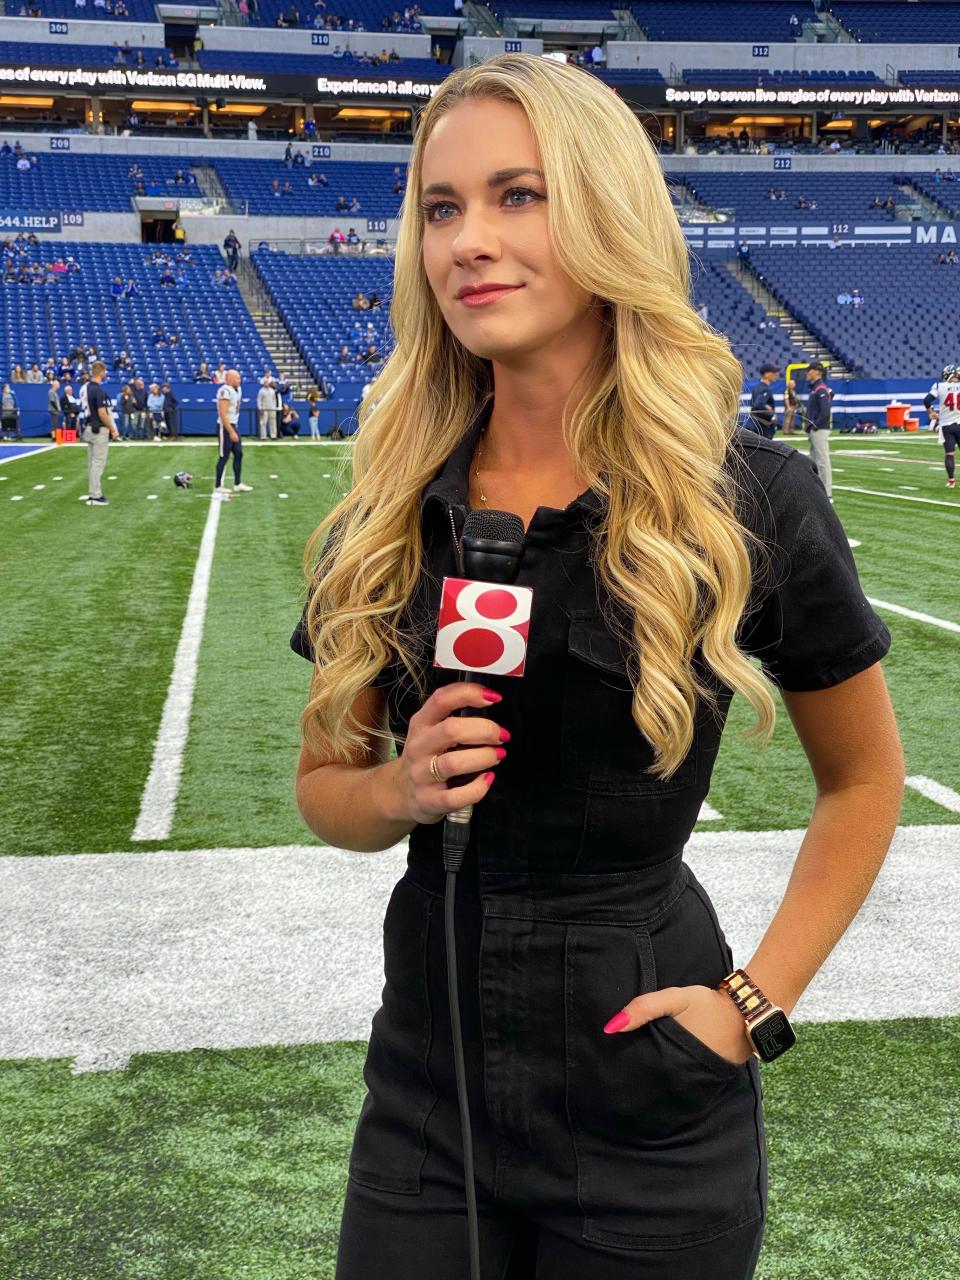 Olivia Ray is a sports reporter and anchor for WISH-TV in Indianapolis.